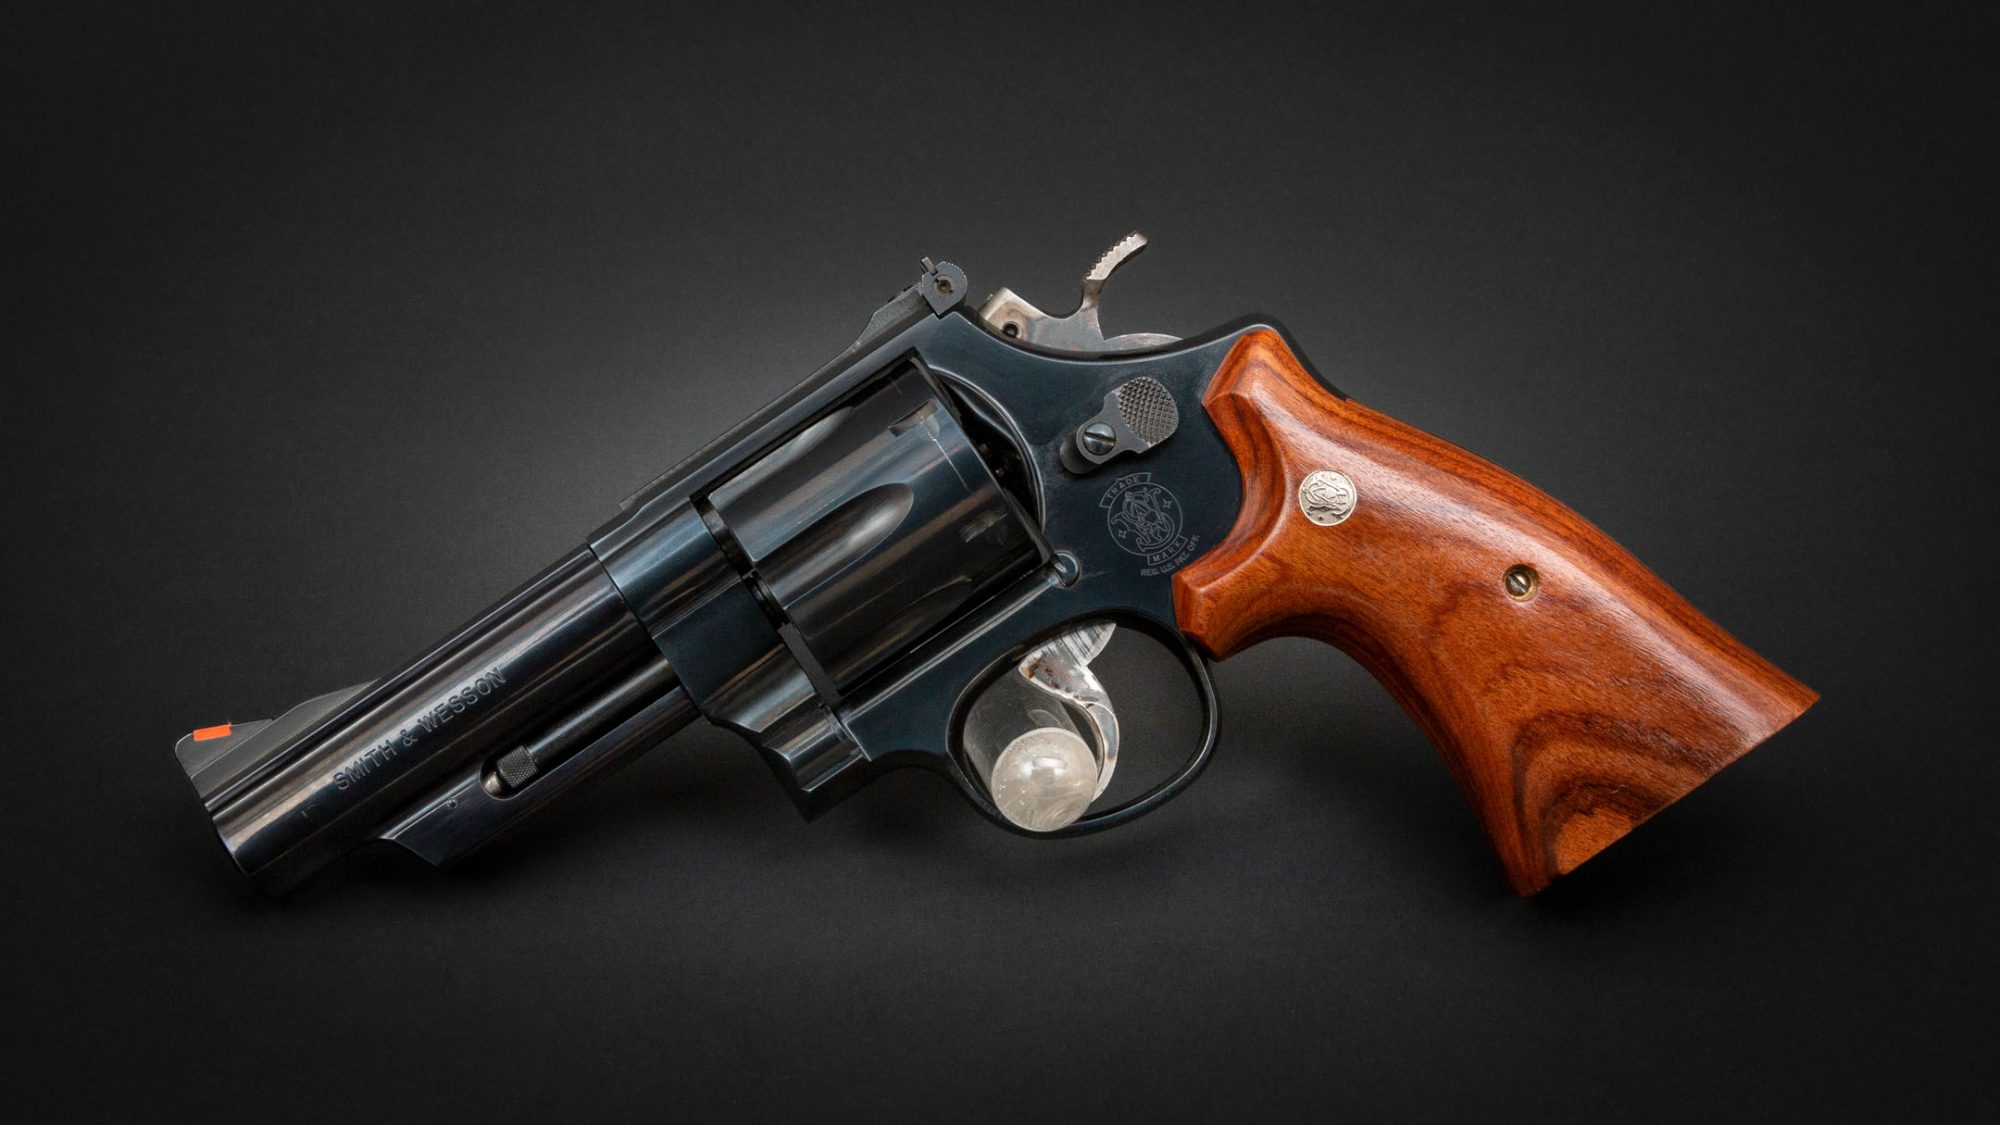 Smith & Wesson Model 29-5 in 44 Magnum, for sale by Turnbull Restoration Co. of Bloomfield, NY